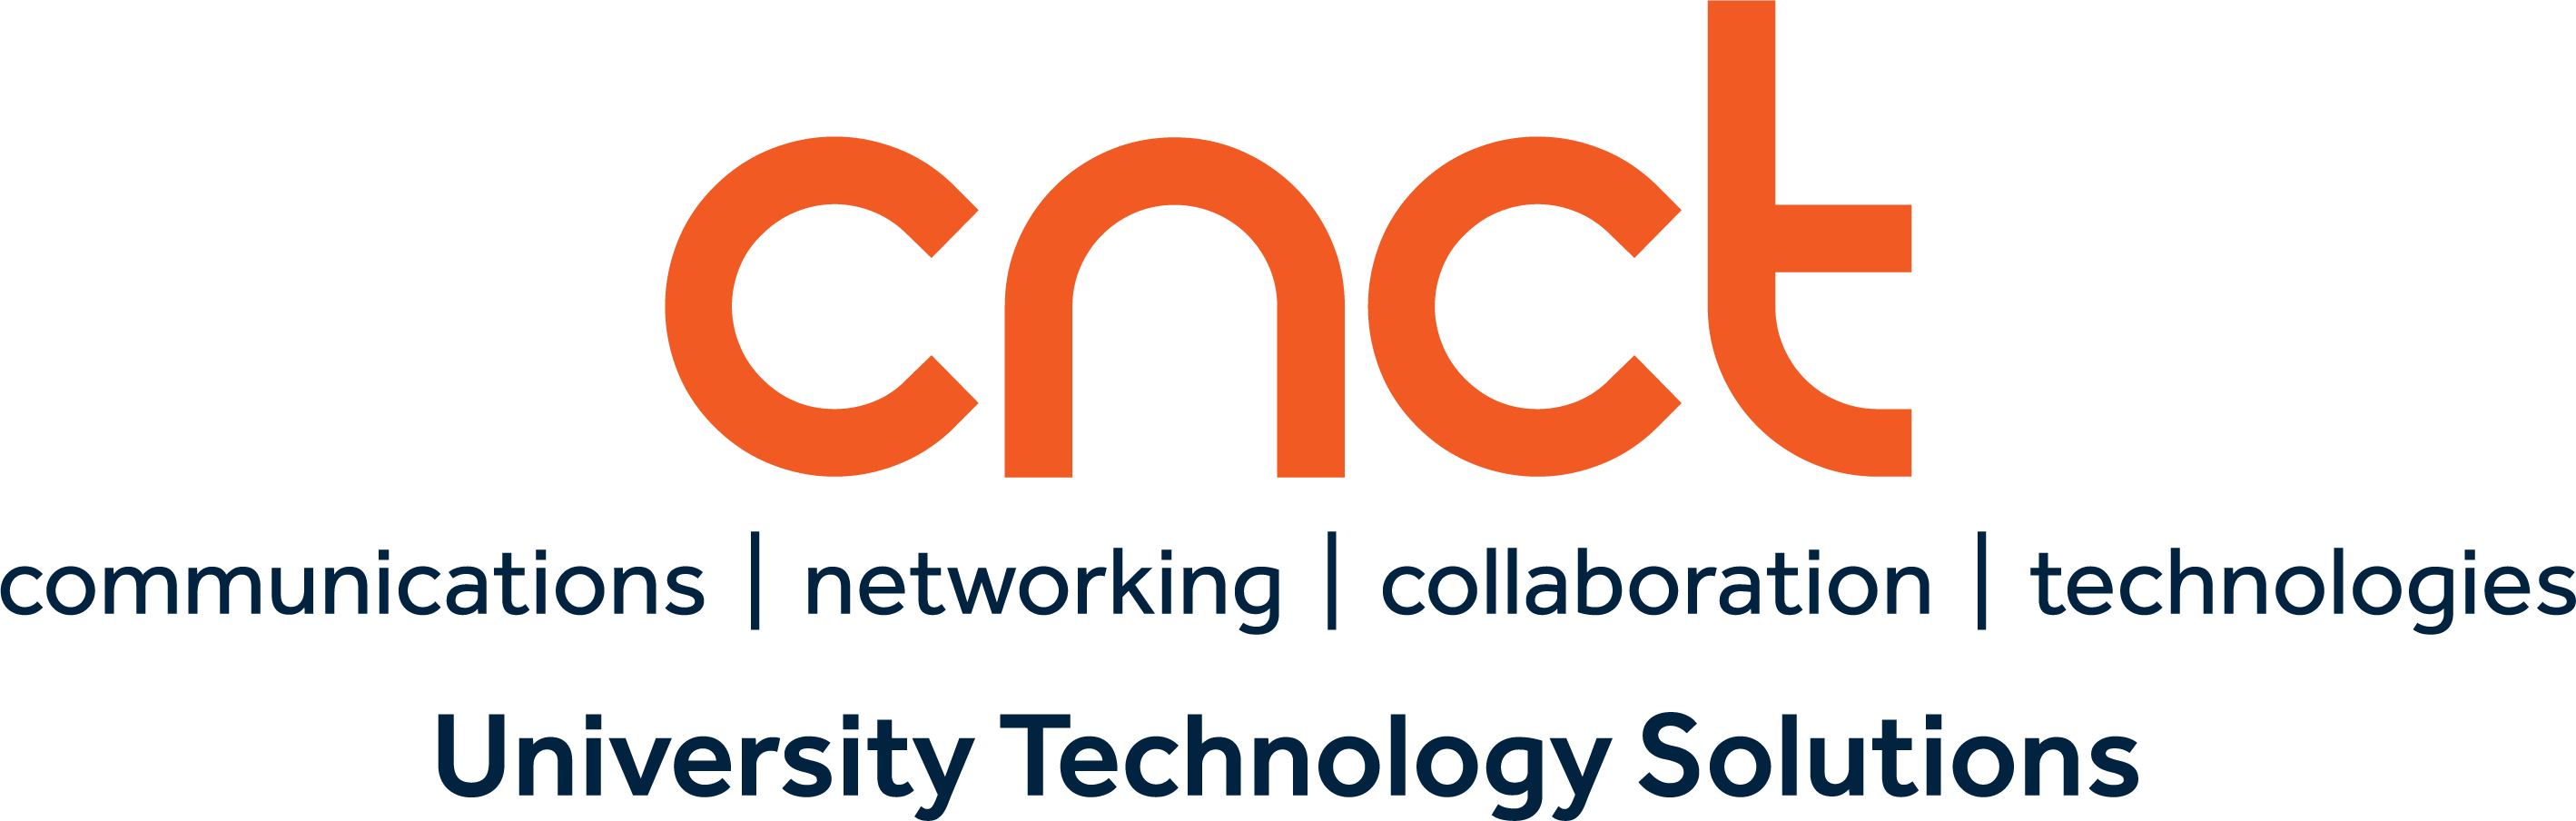 telephoneservices-cnct-logo.png